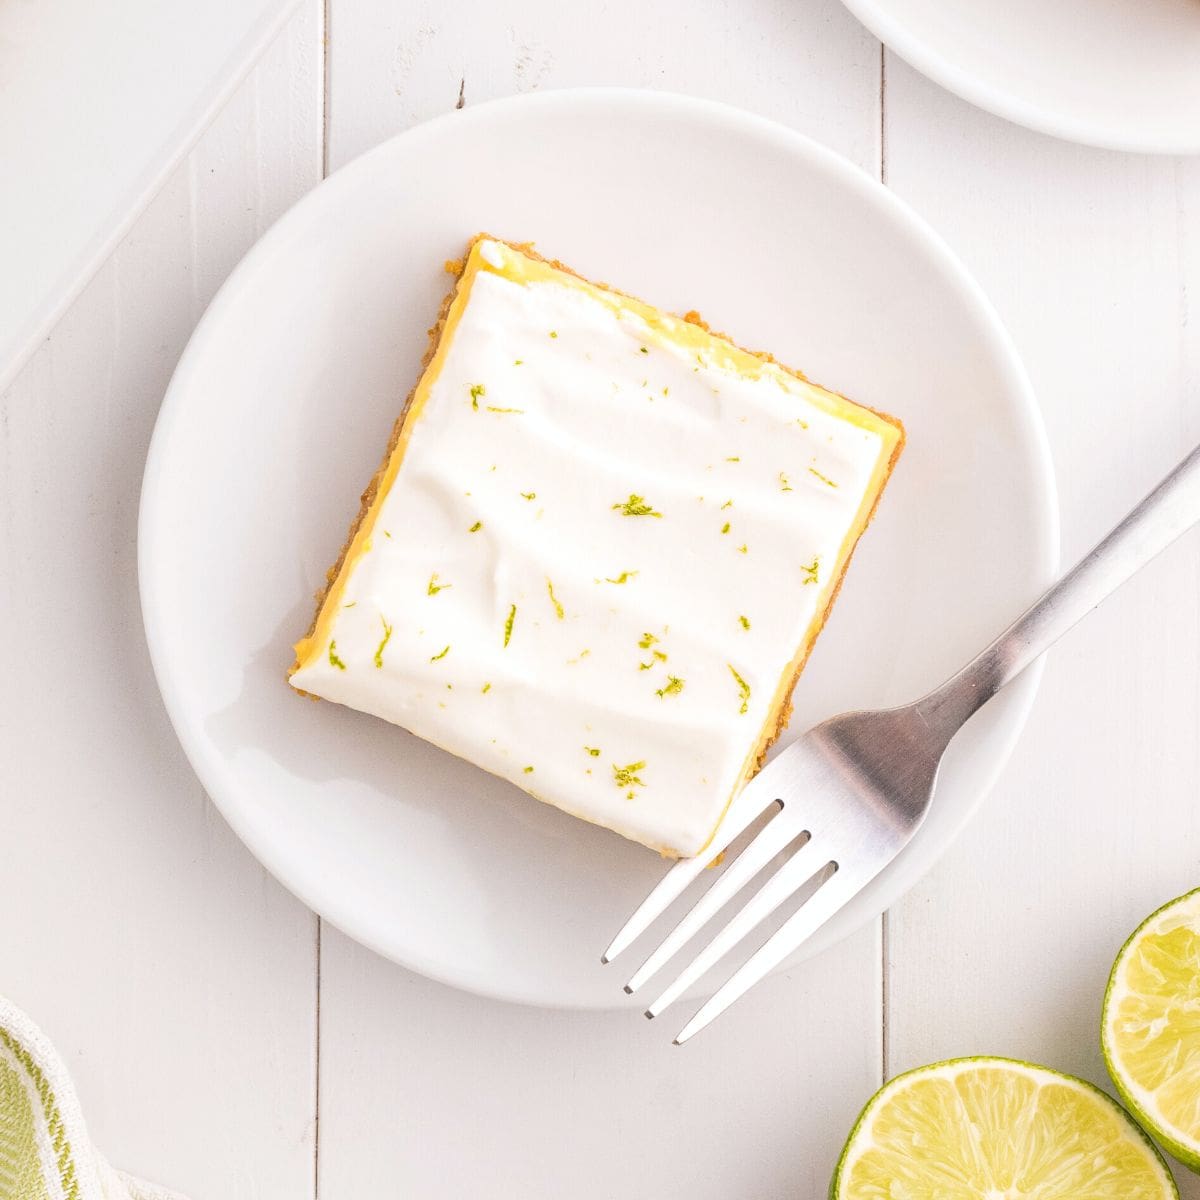 Sugar Free Key Lime Bars, a delicious layered dessert recipe made with a creamy tart filling on a buttery crust with no added sugar.